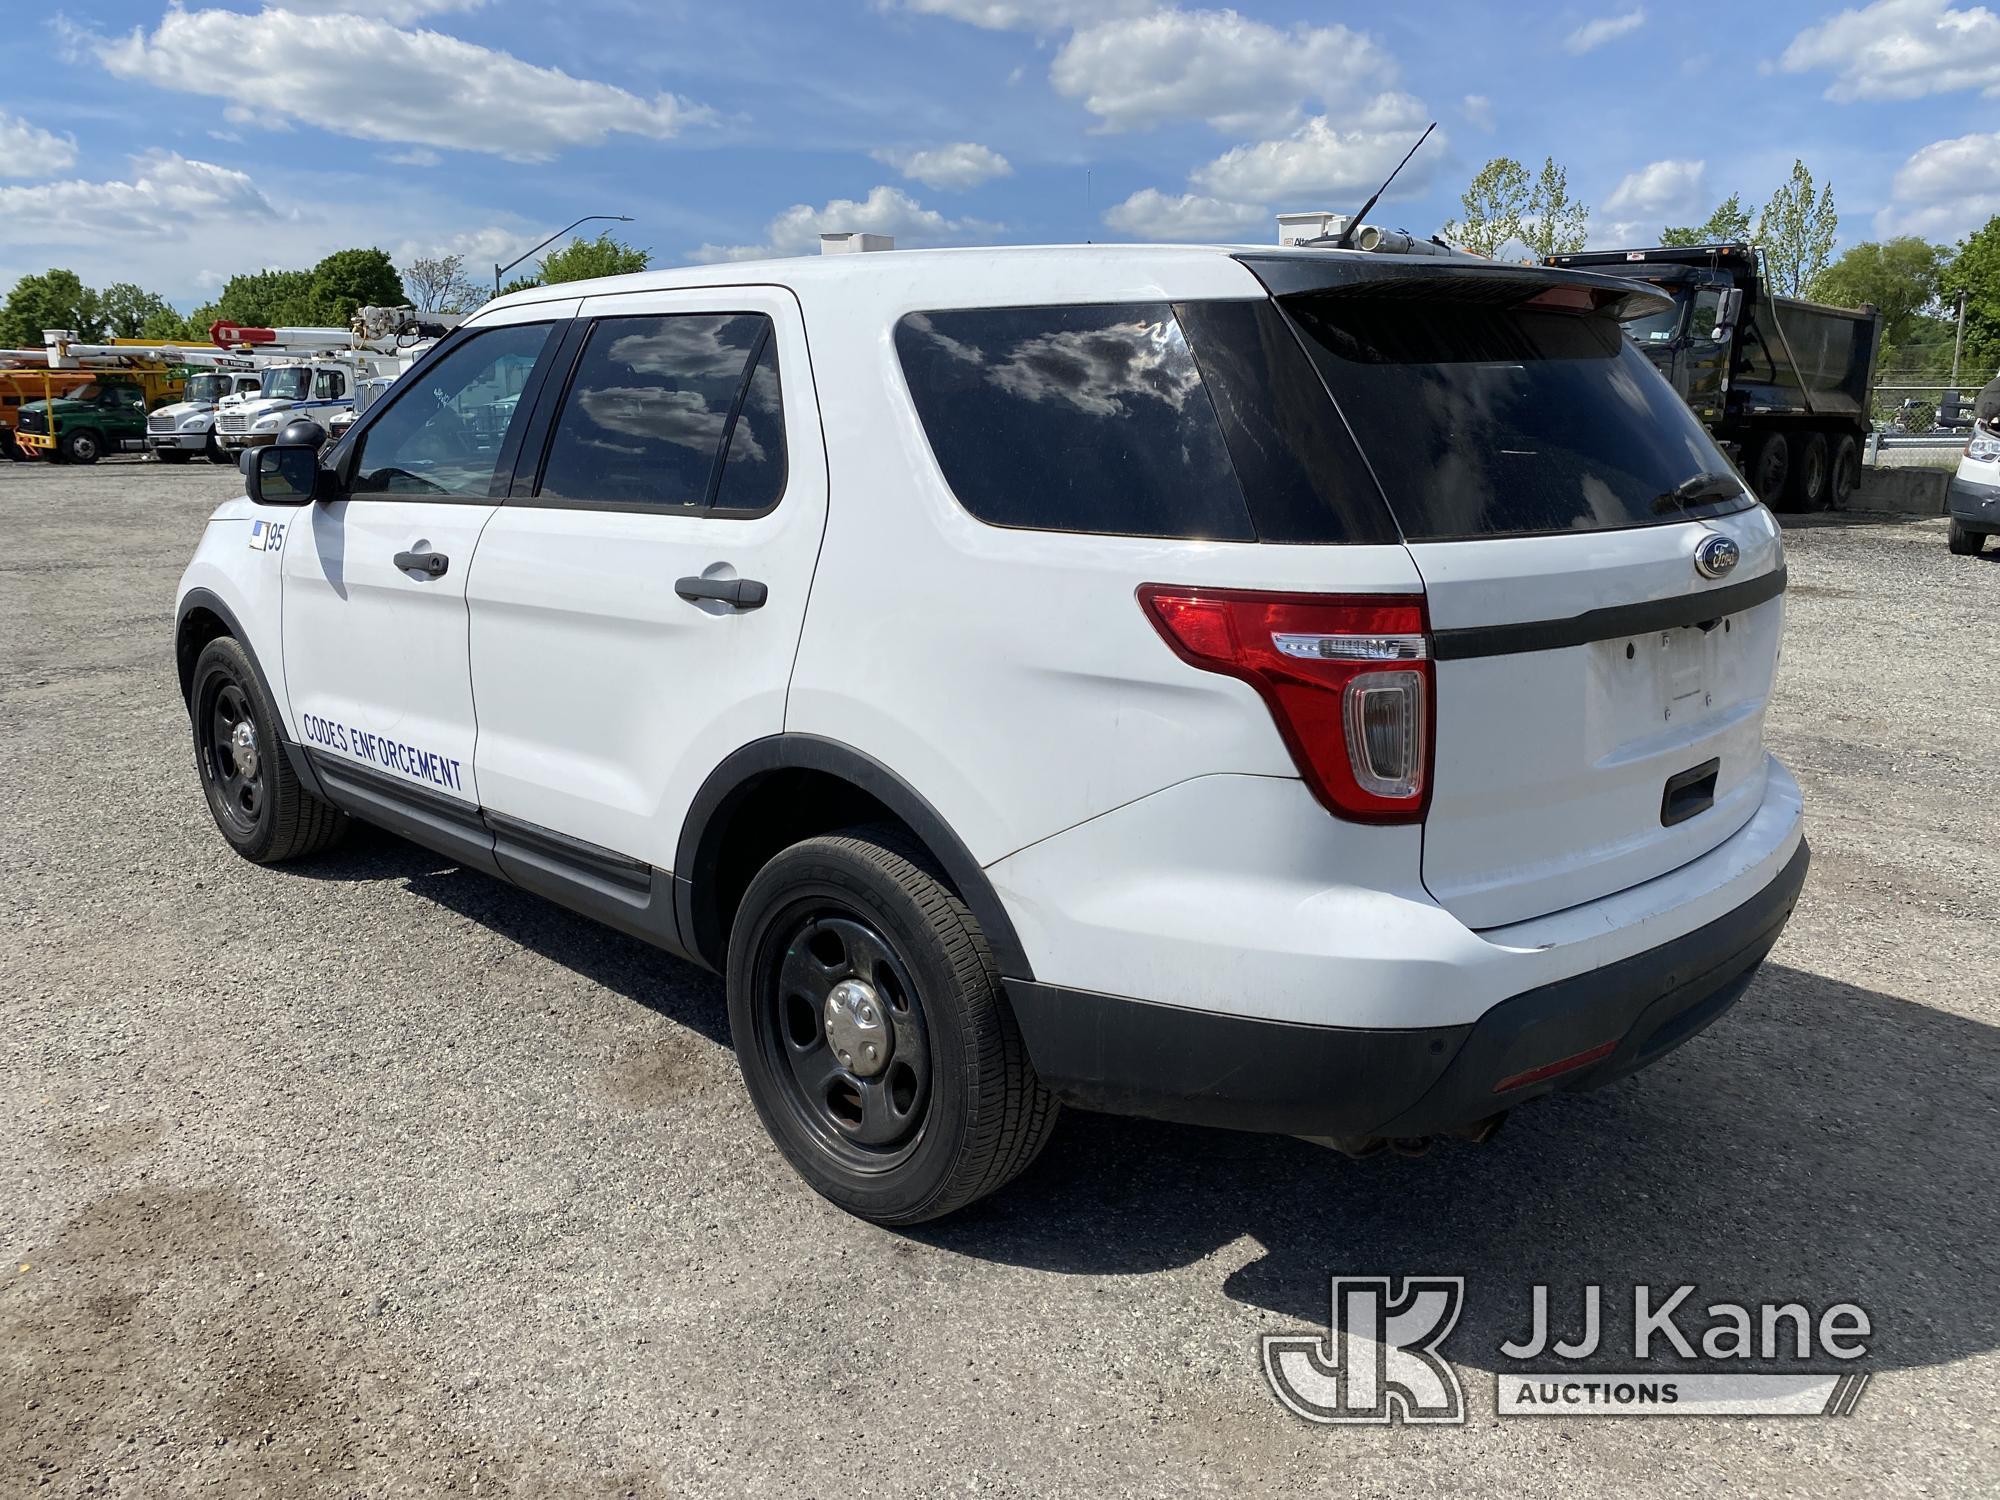 (Plymouth Meeting, PA) 2013 Ford Explorer AWD Police Interceptor 4-Door Sport Utility Vehicle Former